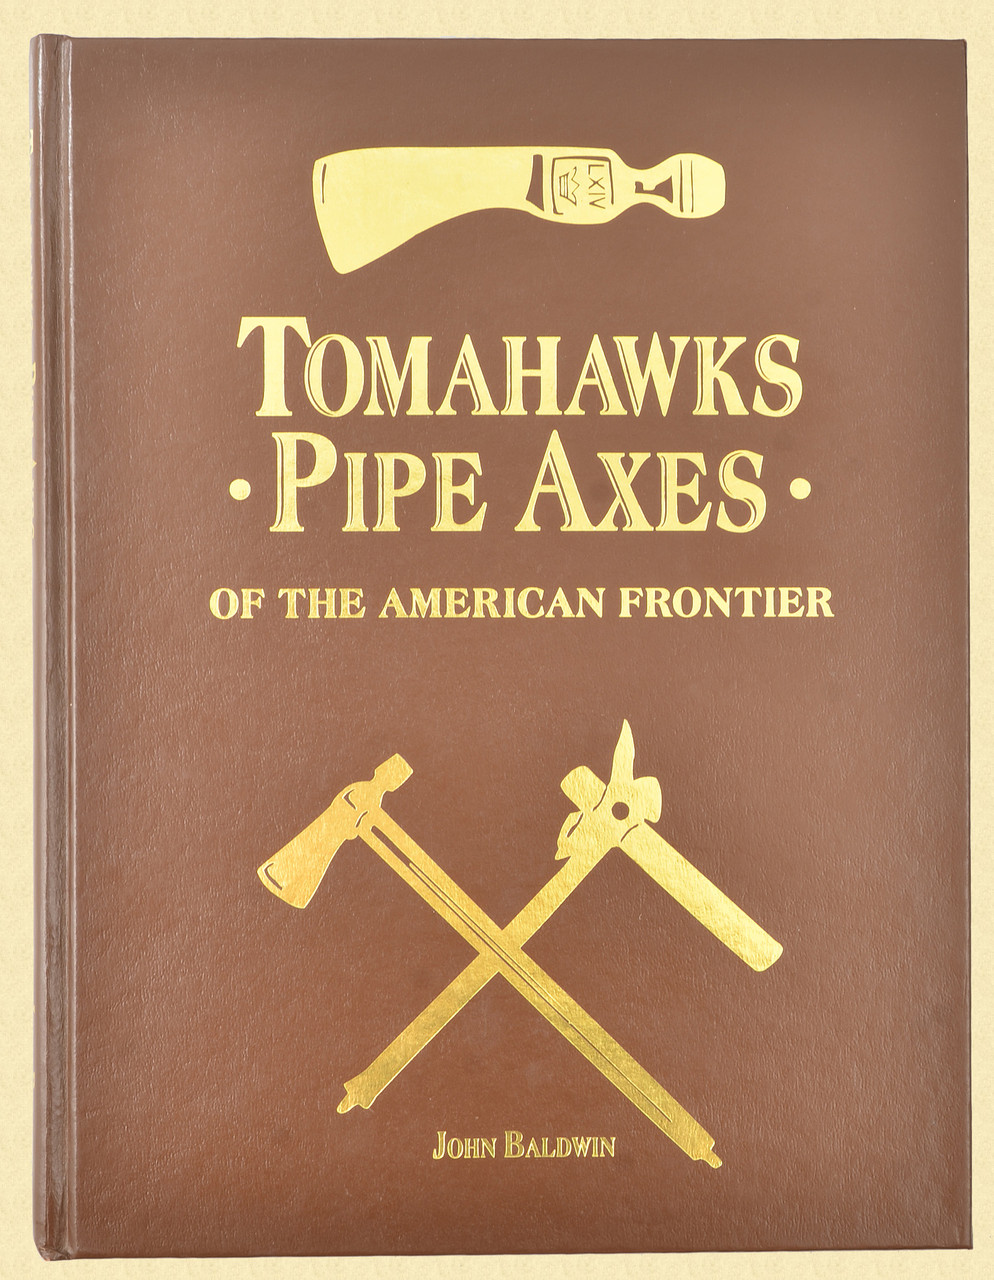 TOMAHAWKS PIPE AXES BOOK - C52369